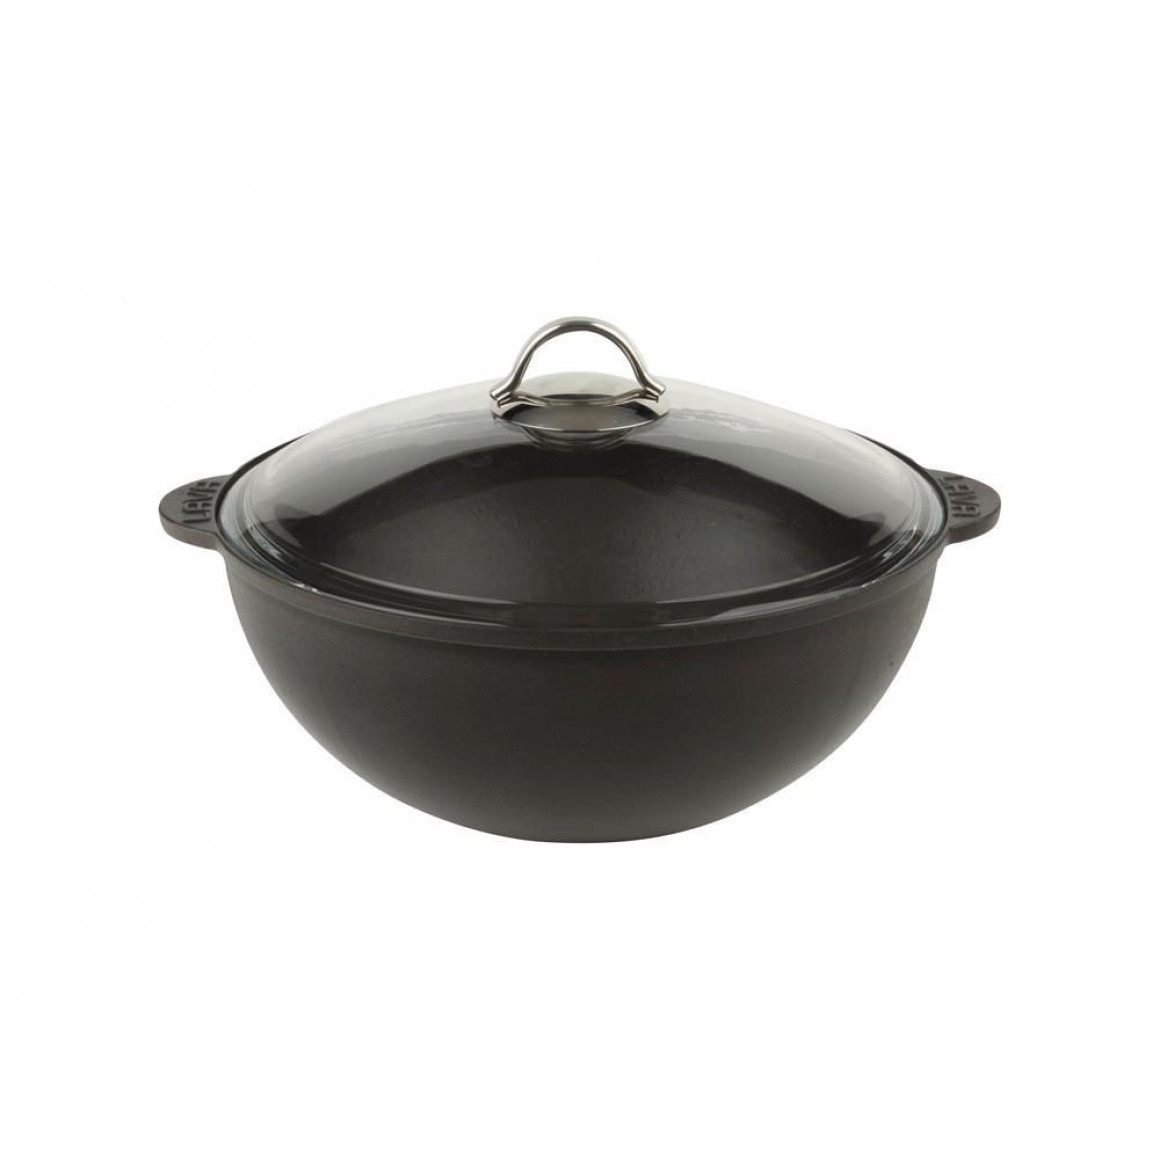 ROUND DEEP CASSEROLE WITH GLASS LID